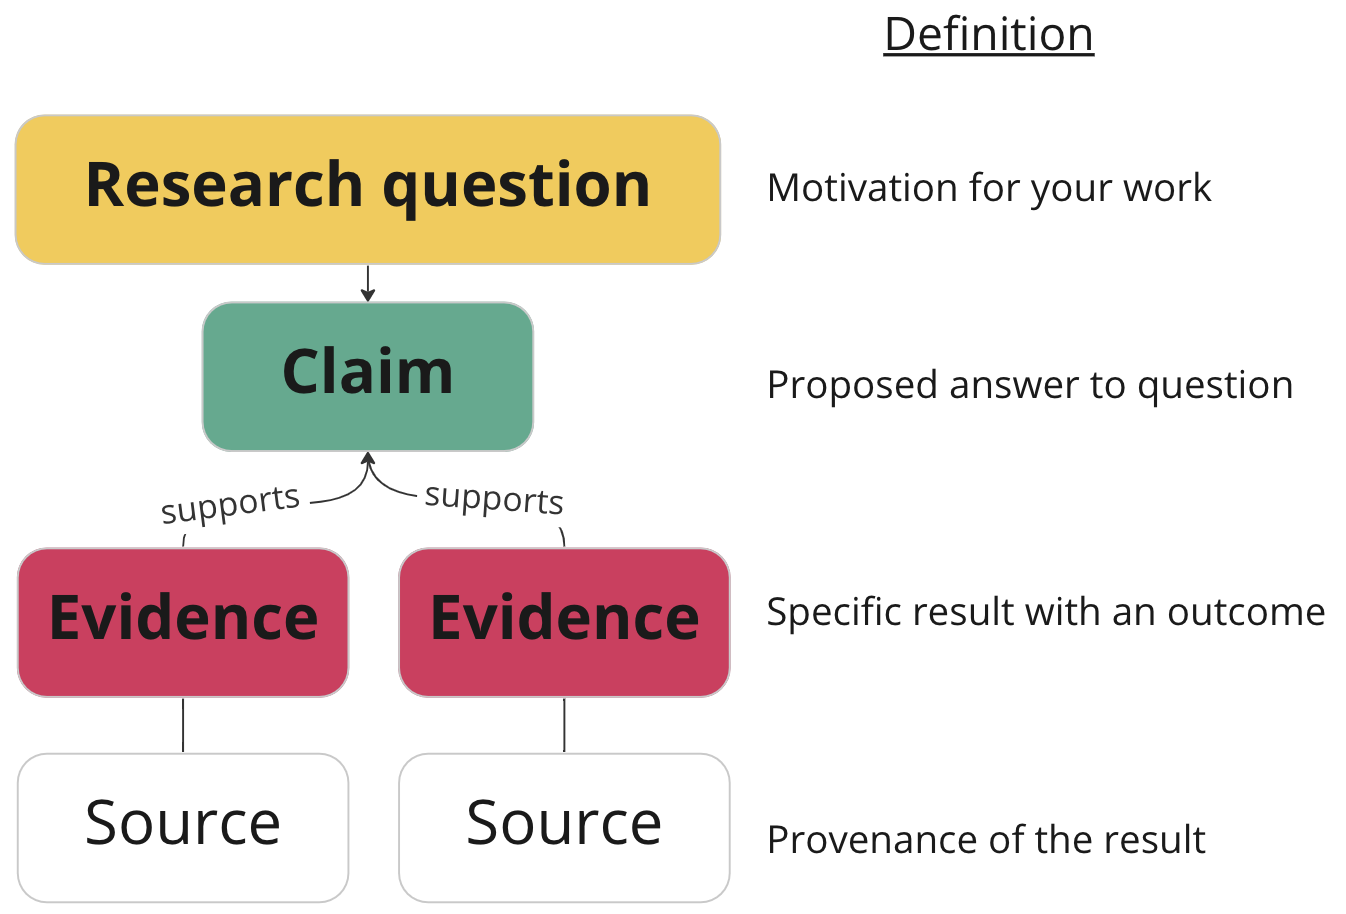 Discourse graph schema. Scientific arguments are decomposed into their constituent parts &ndash; questions, claims, evidence &ndash; and connected into a graph. Evidence can support or oppose a claim.